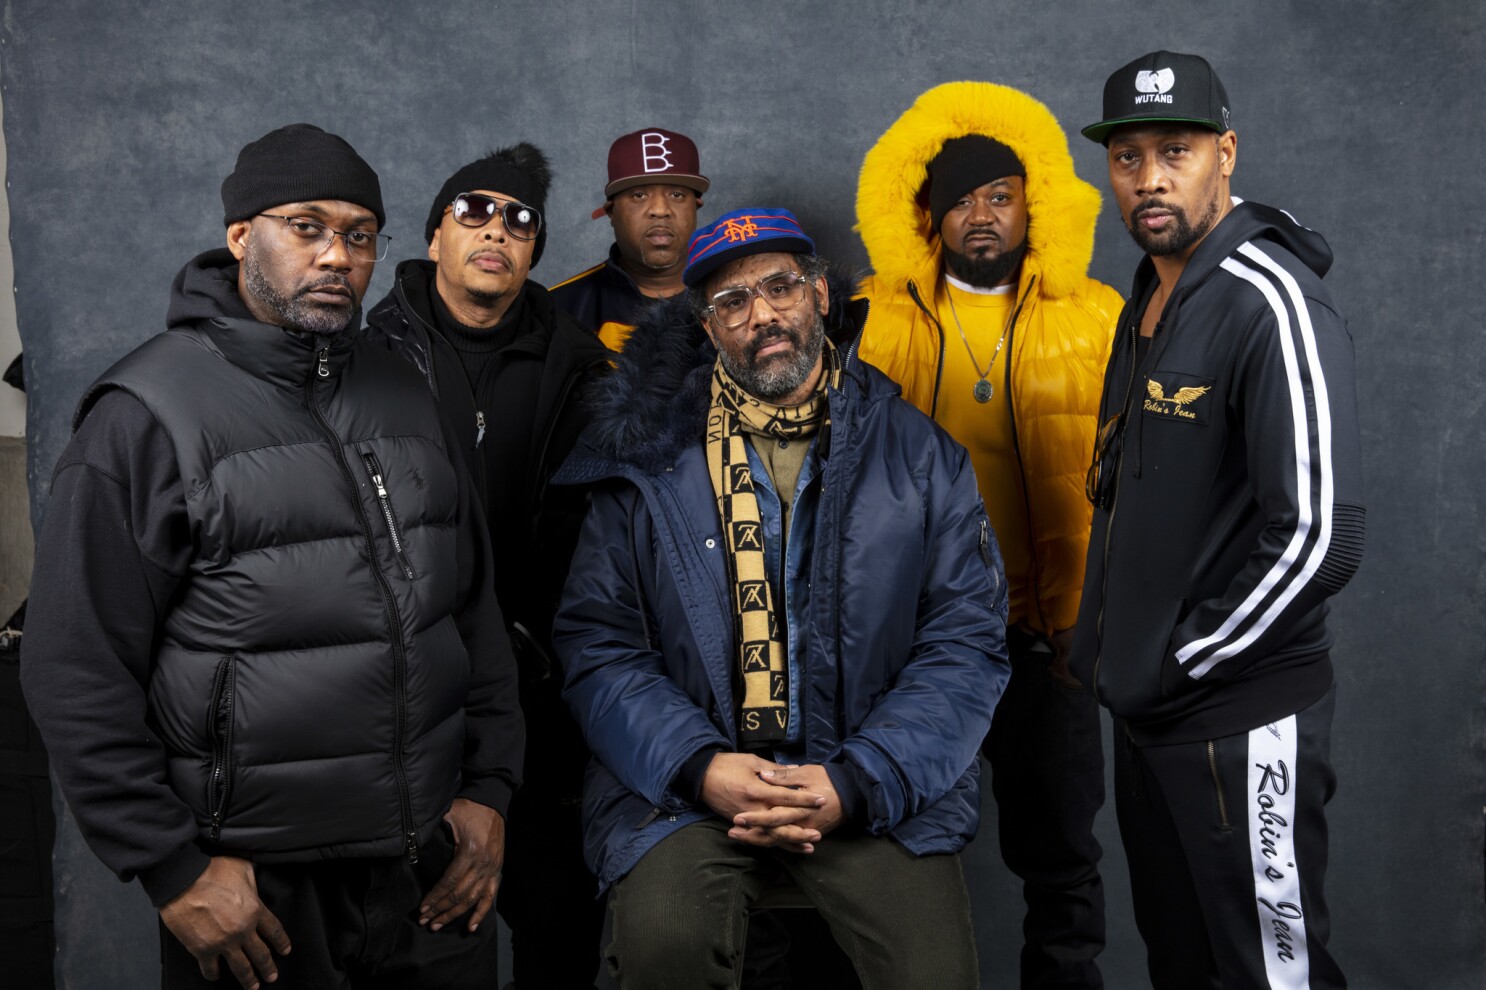 Lijkt op dood spannend Review: 'Wu-Tang Clan: Of Mics and Men' captures the group's wonderfully  bizarre essence - Los Angeles Times